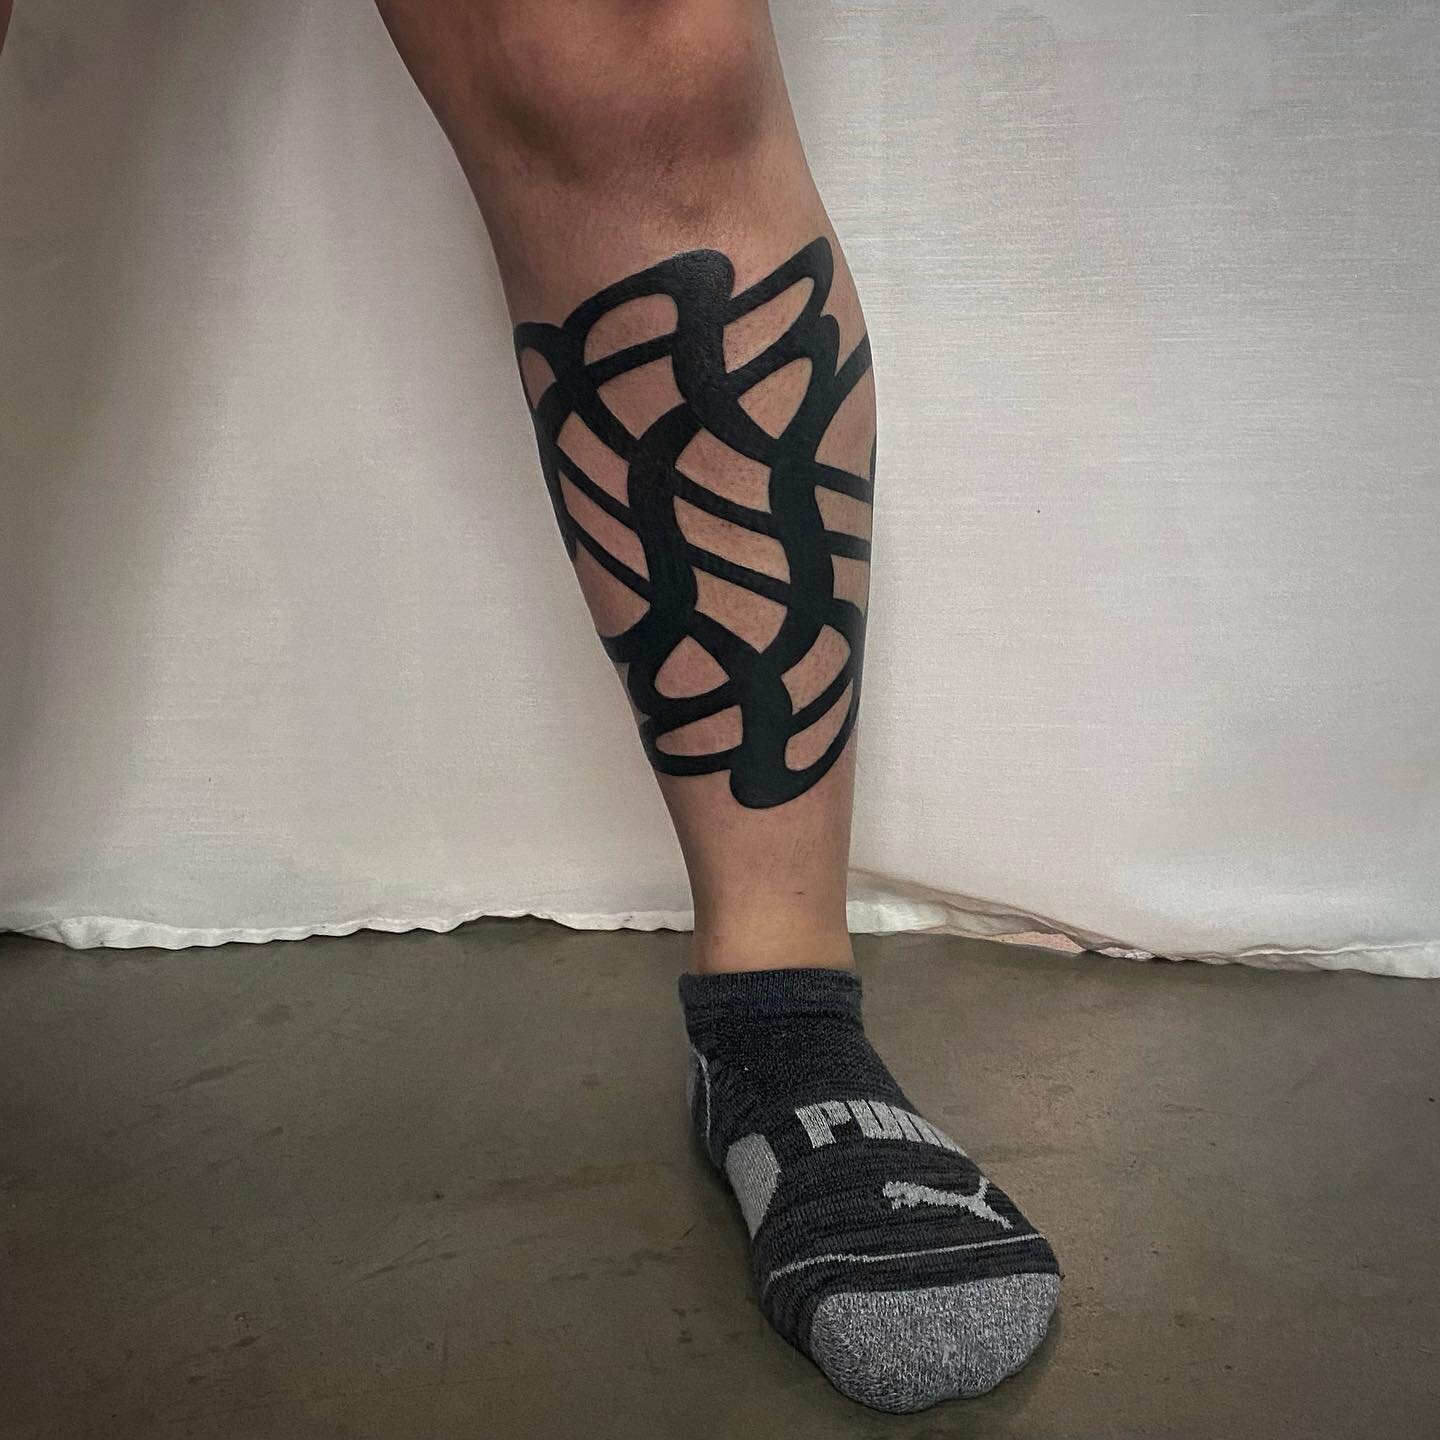 Big wrappy warpy knot for S! Thank you for your trust with this piece and for sitting so tuff 🫡 I love this tattoo so dang much 😤❤️&zwj;🔥

Swipe to see more angles, a twirly video, a weird fleshy photo stitch of the entire design! Last slide has s